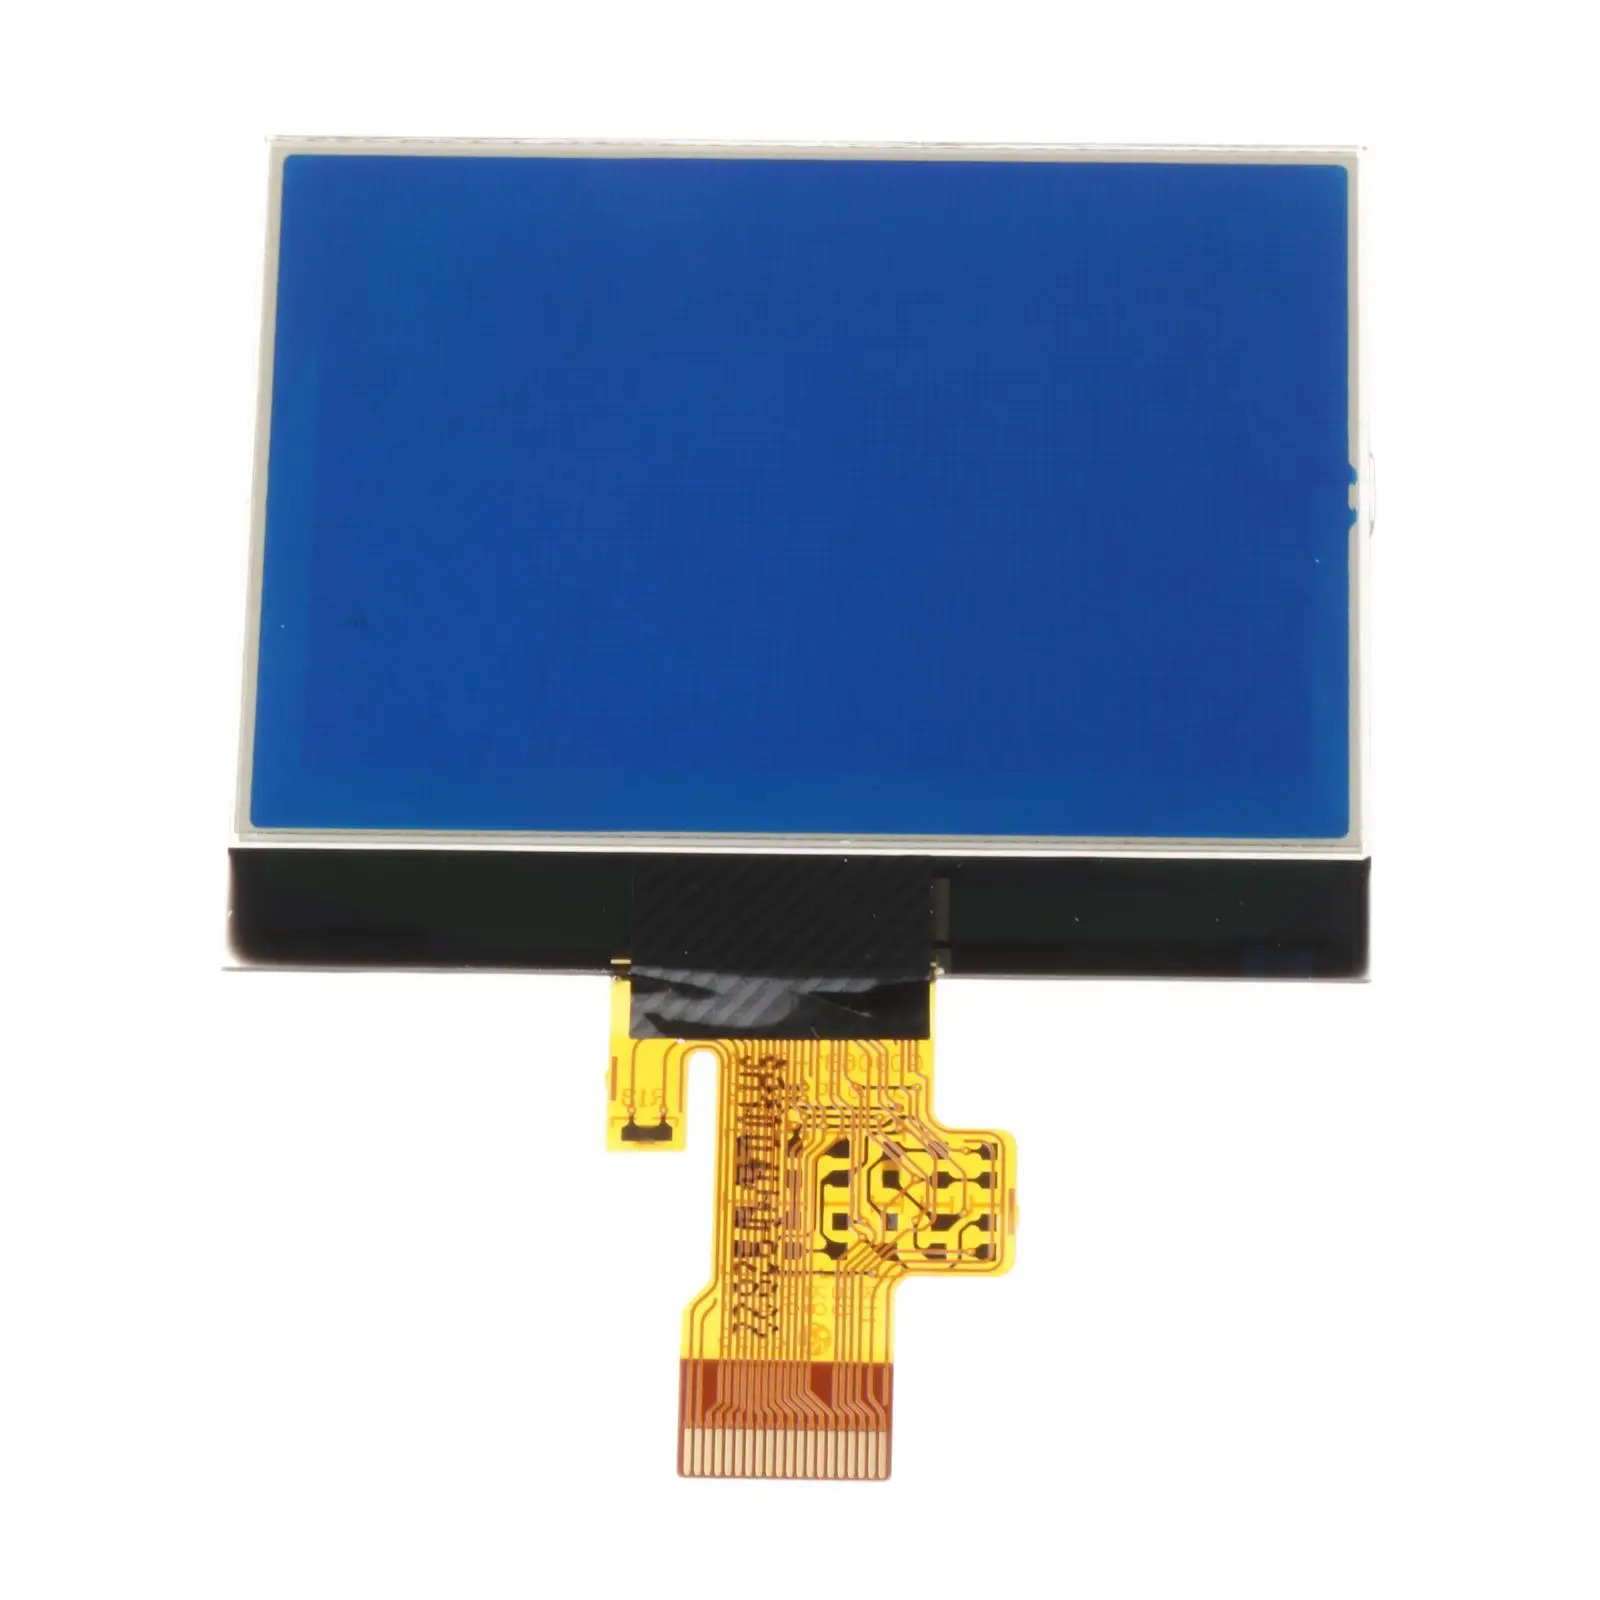 Car LCD Display Screen A2C53119649 9658138580 Pixel Repair Easy to Install Professional  Panels for  2004-06